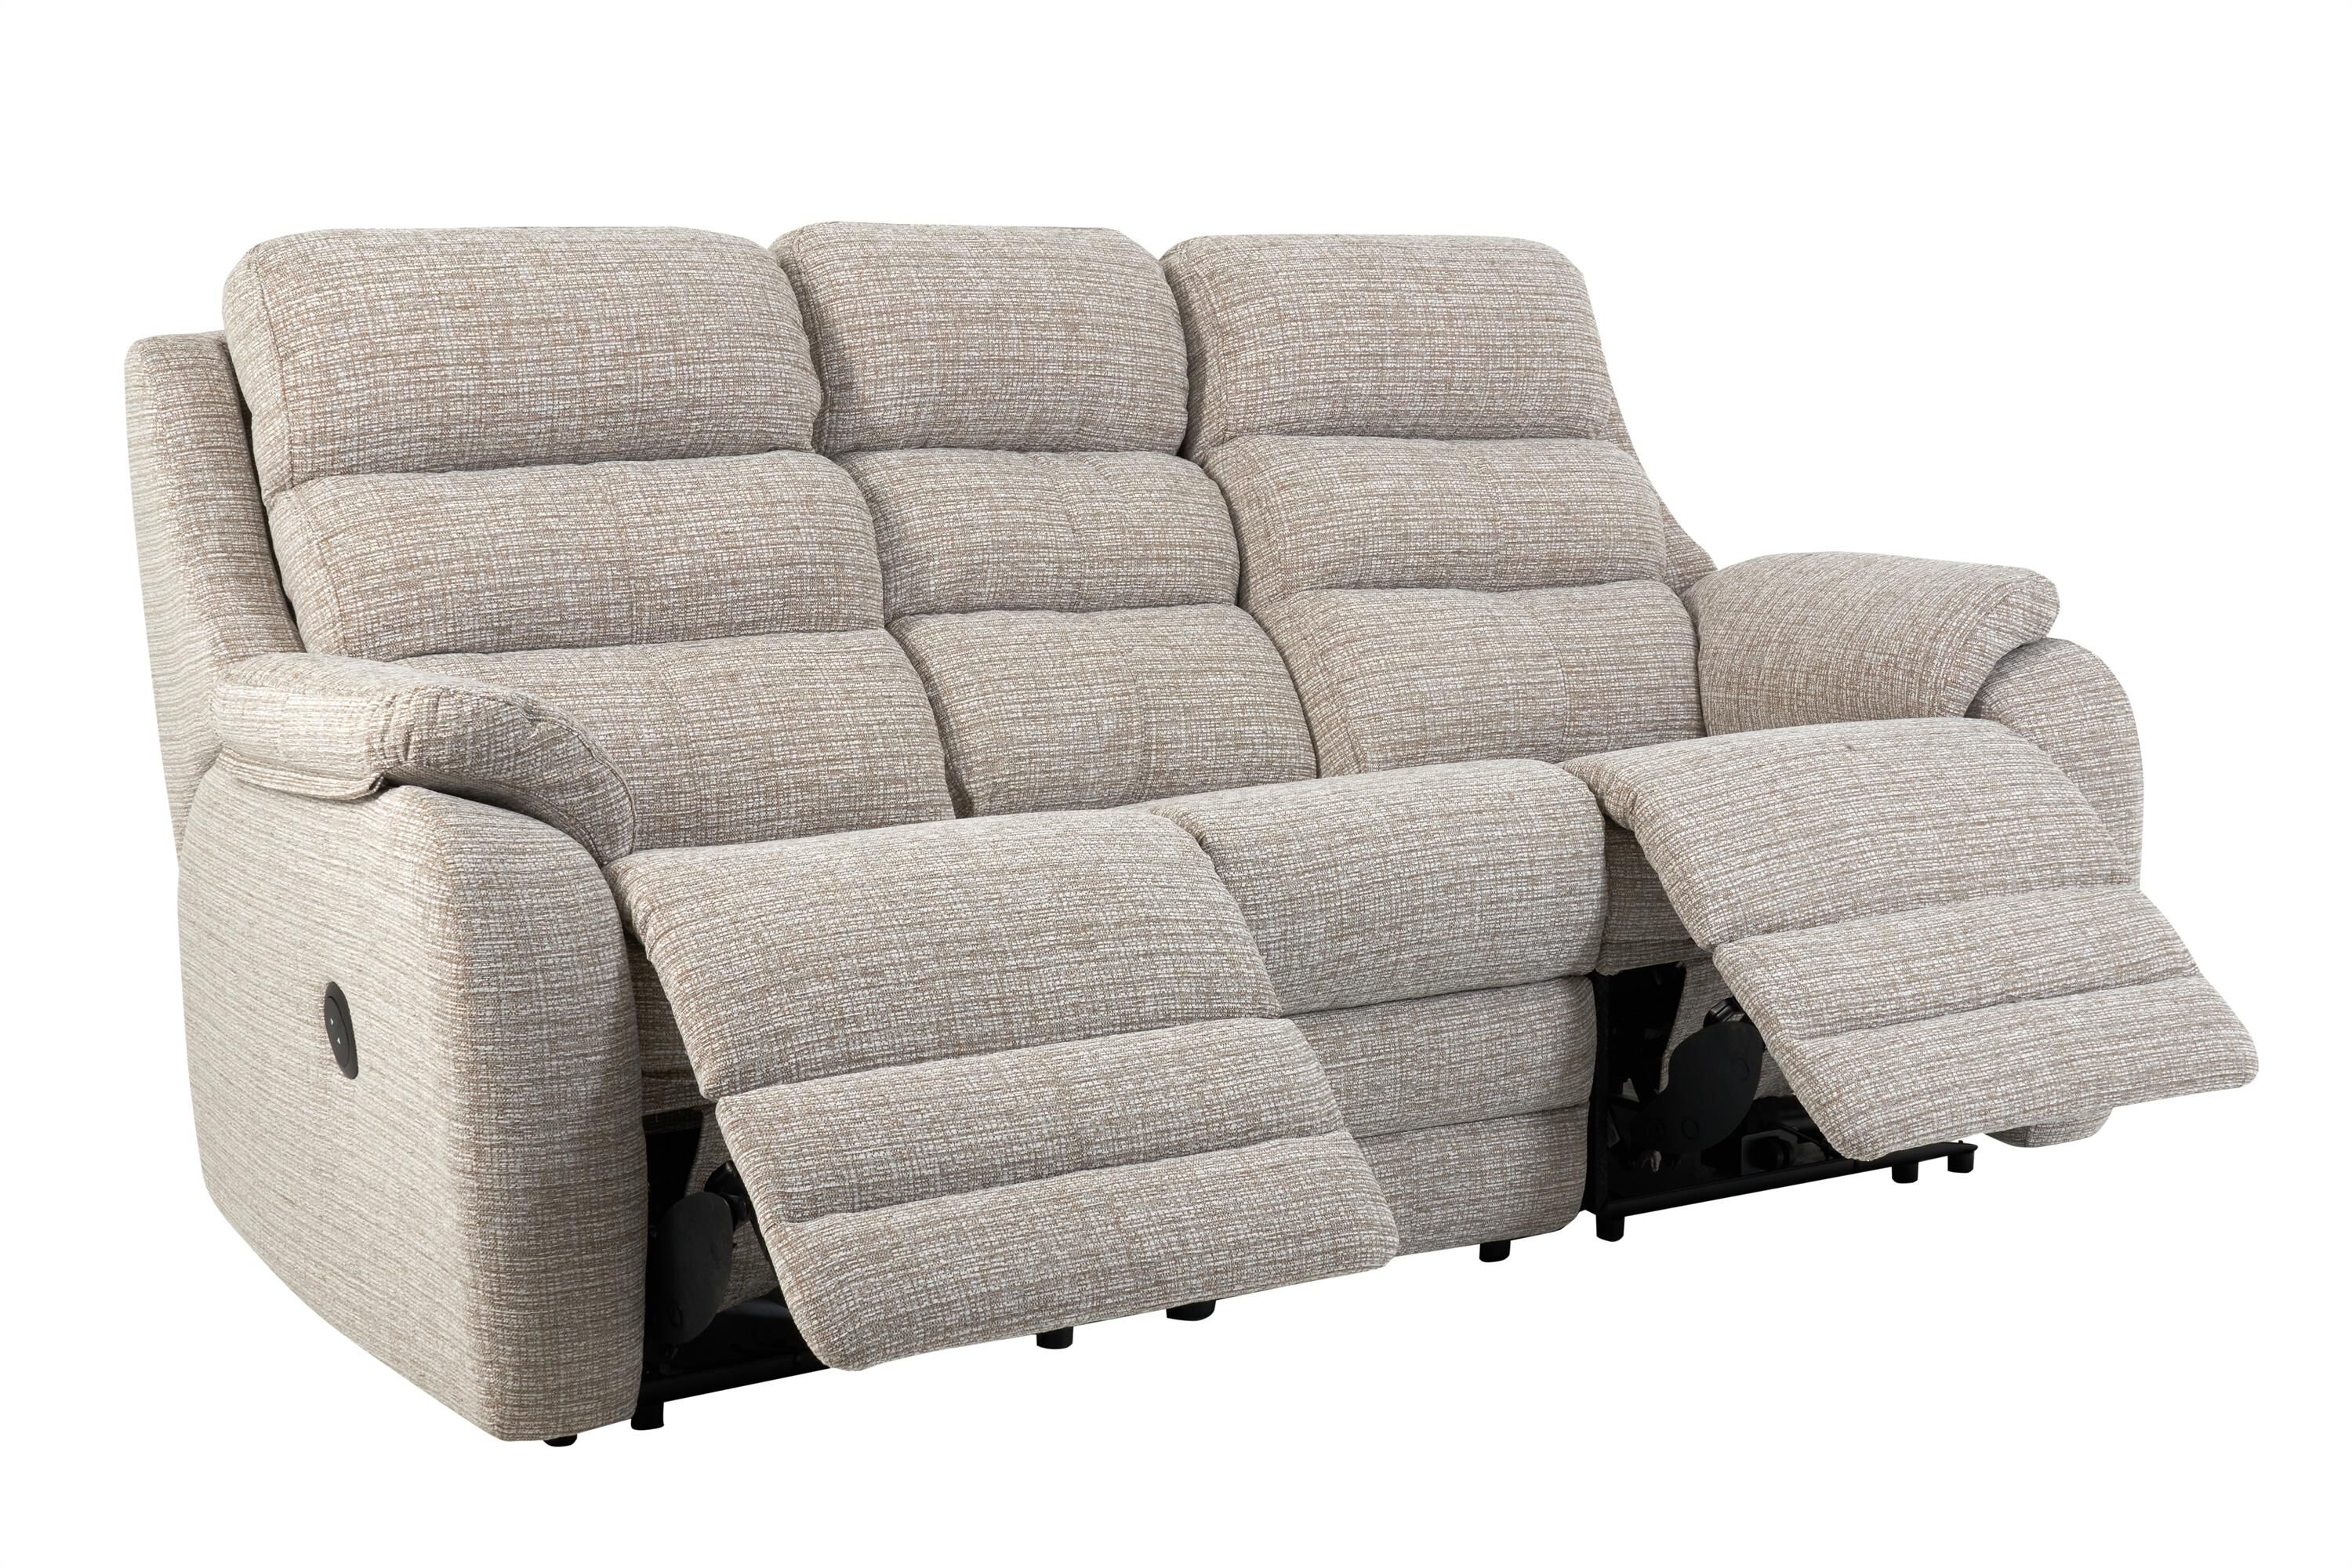 DFS Dfs G plan recliner chair and footstool 